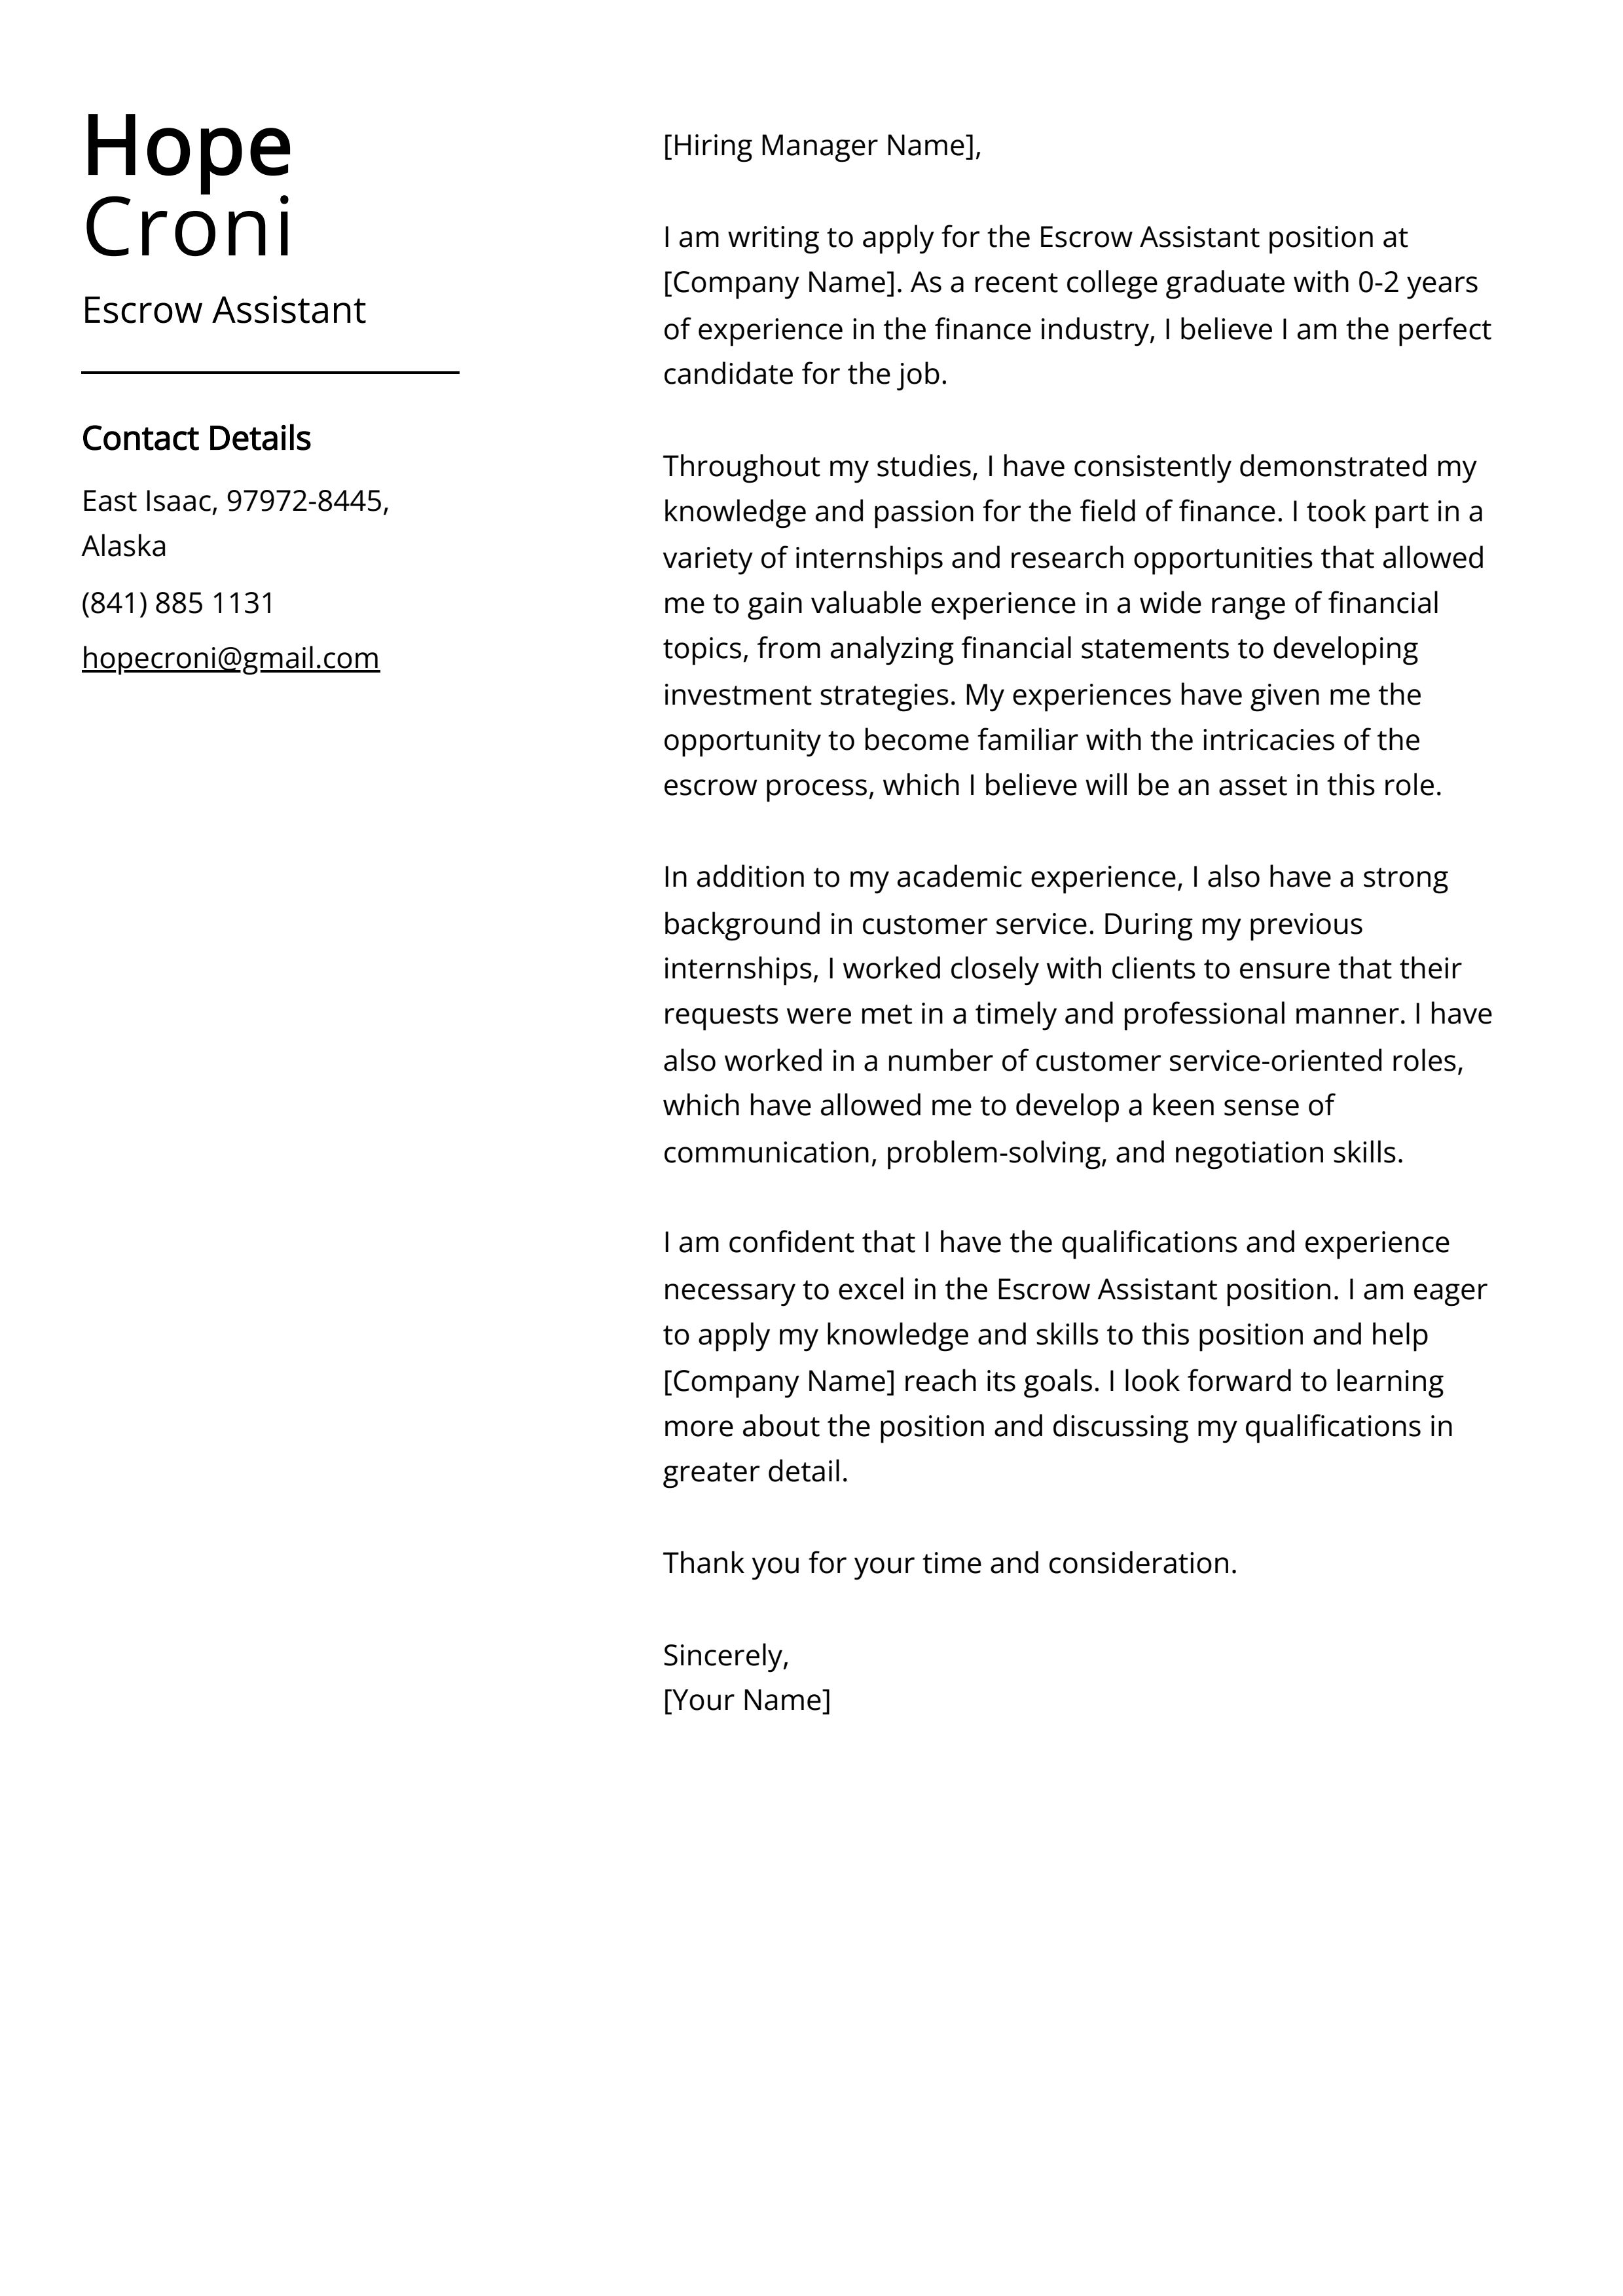 Escrow Assistant Cover Letter Example